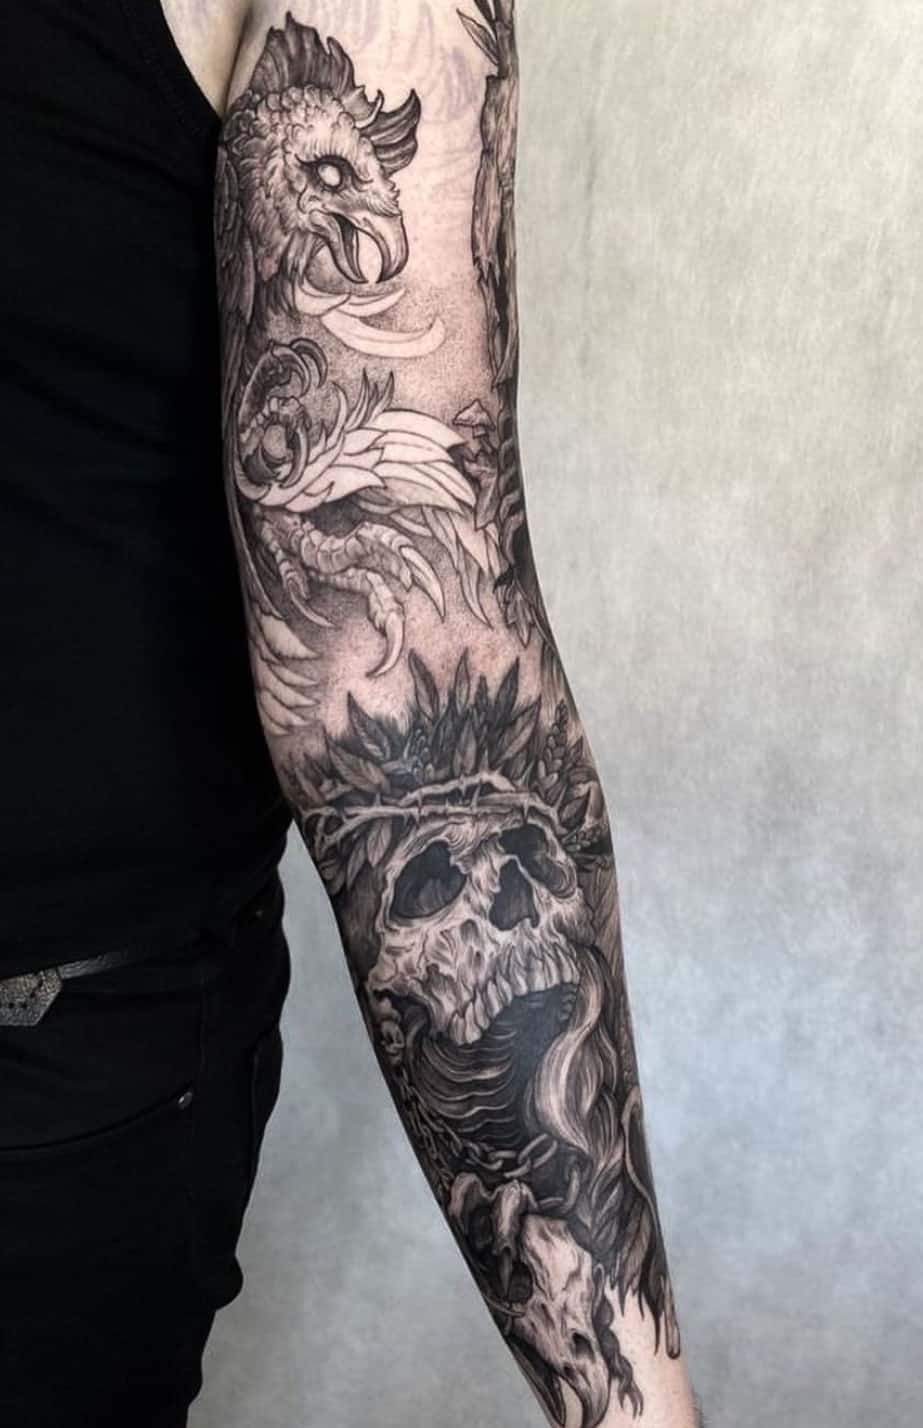 witcher full sleeve tattoo with skull and dragon